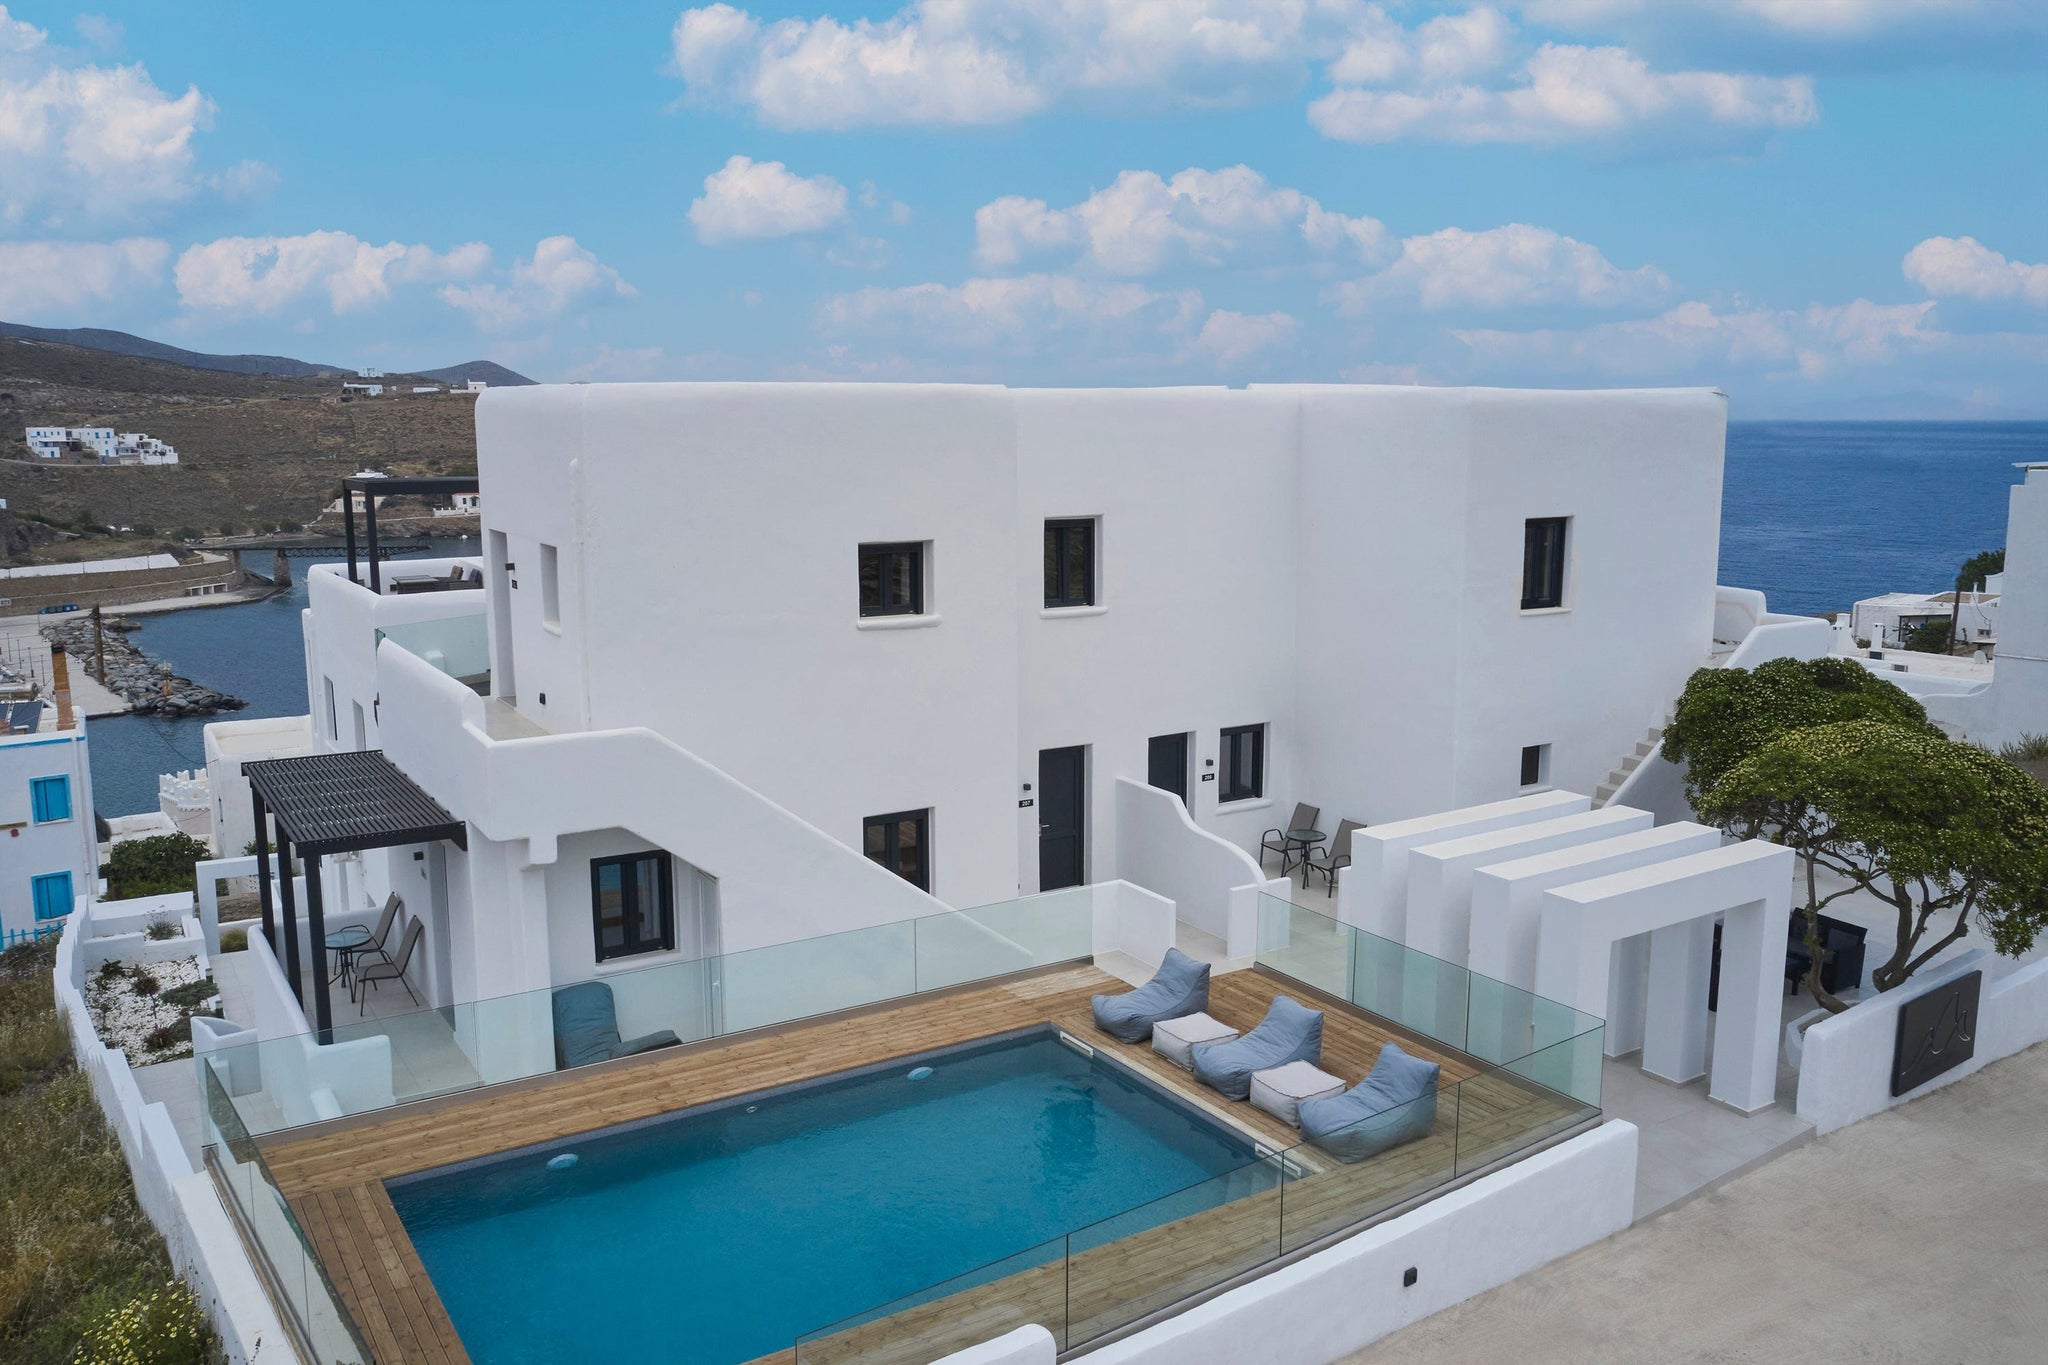 Thermia Suites Boutique Hotel Kythnos Island Greece Standard Double Room with Sea View